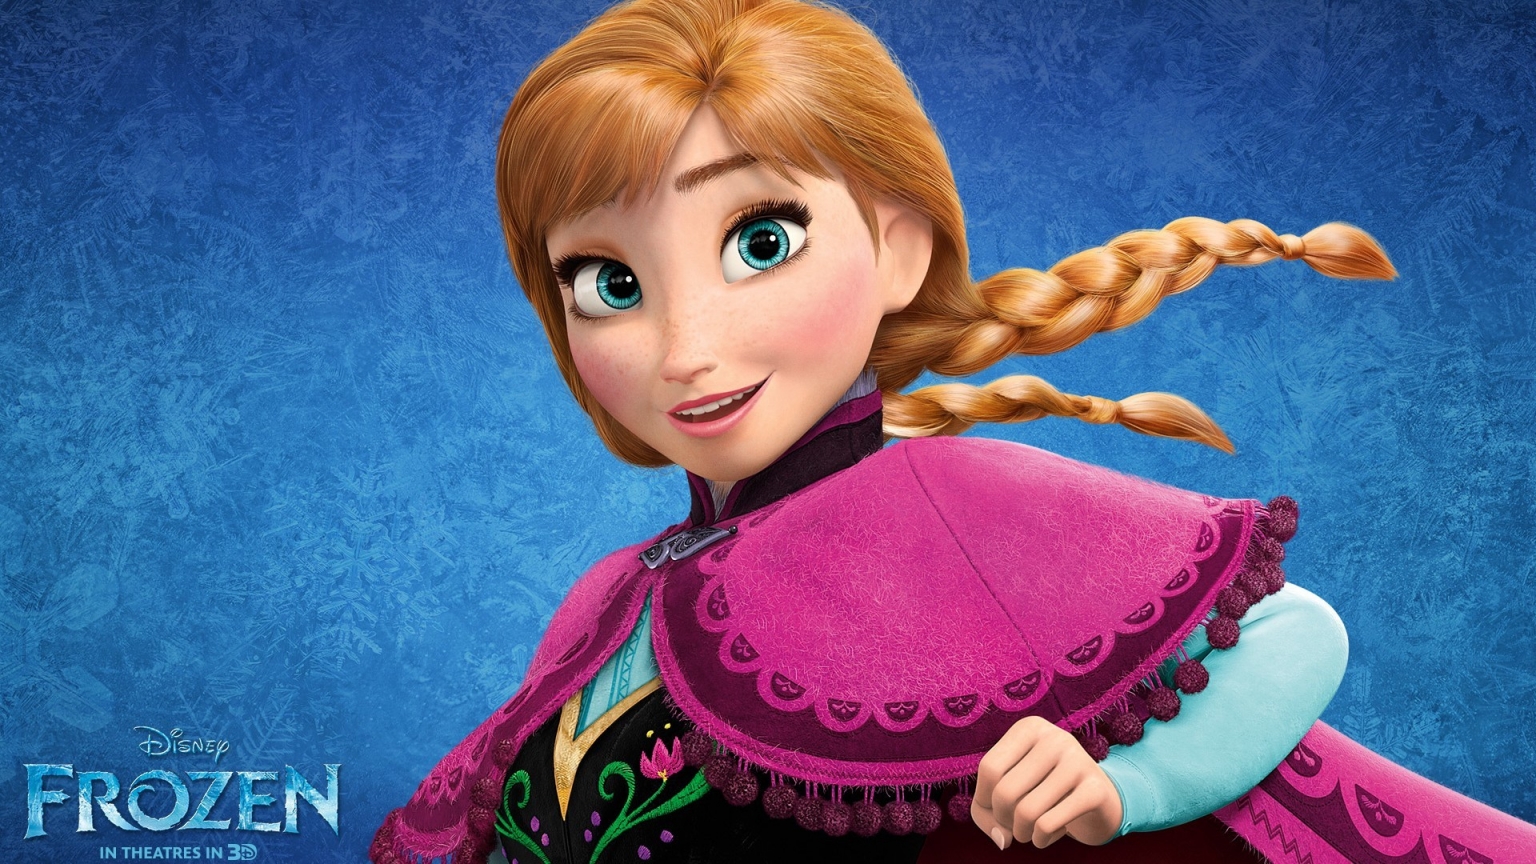 Frozen Movie Character for 1536 x 864 HDTV resolution